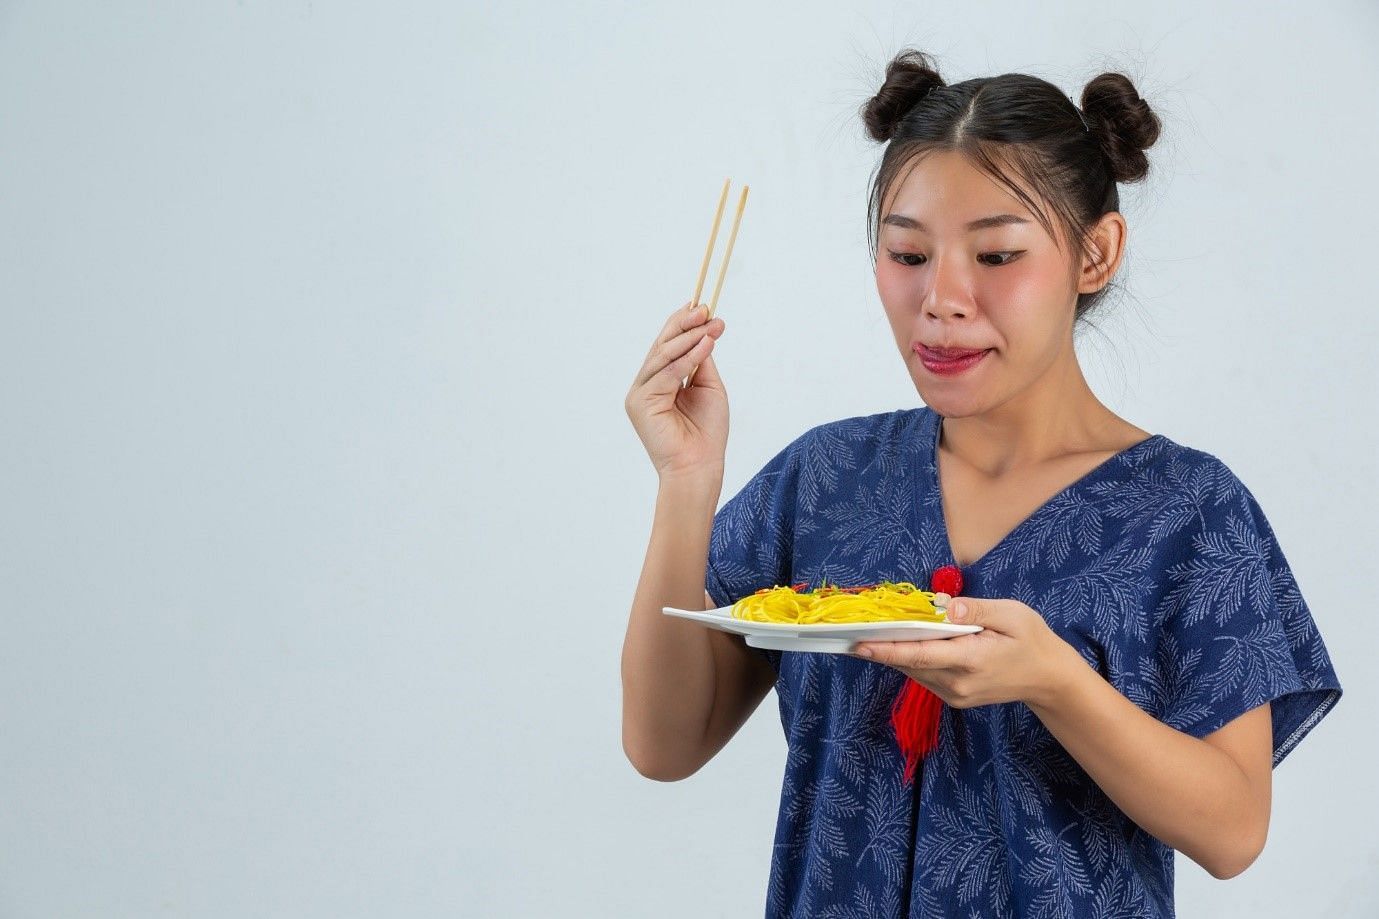 Excessive consumption of noodles can cause skin breakouts as well due to the high amount of salt and spices present in it (Image by Jcomp on Freepik)